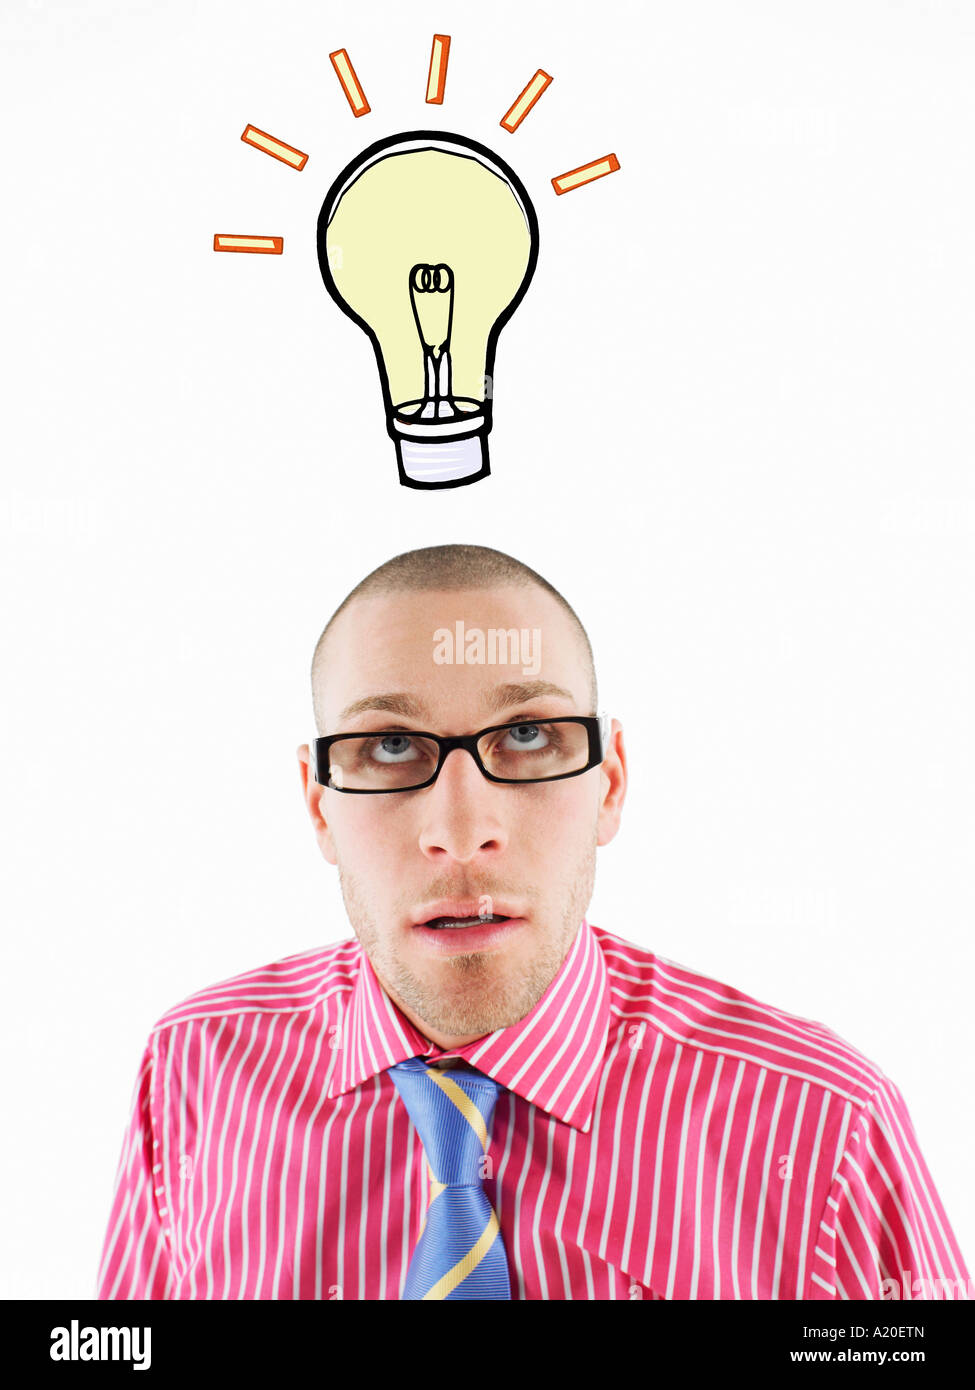 Man in glasses looking up, head and shoulders, below illustrated light bulb Stock Photo